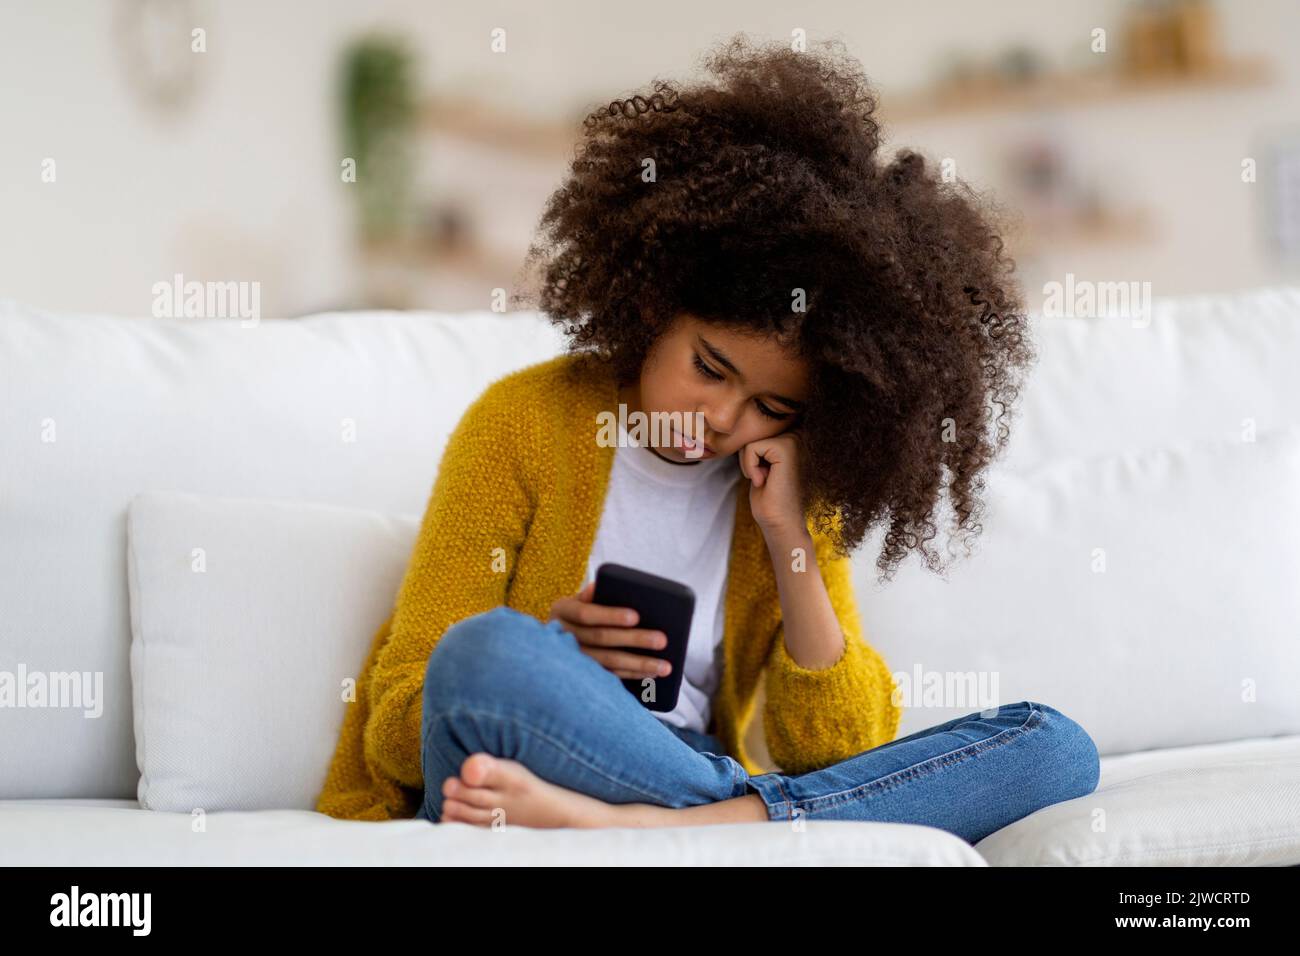 Bored african american preteen girl using cell phone Stock Photo